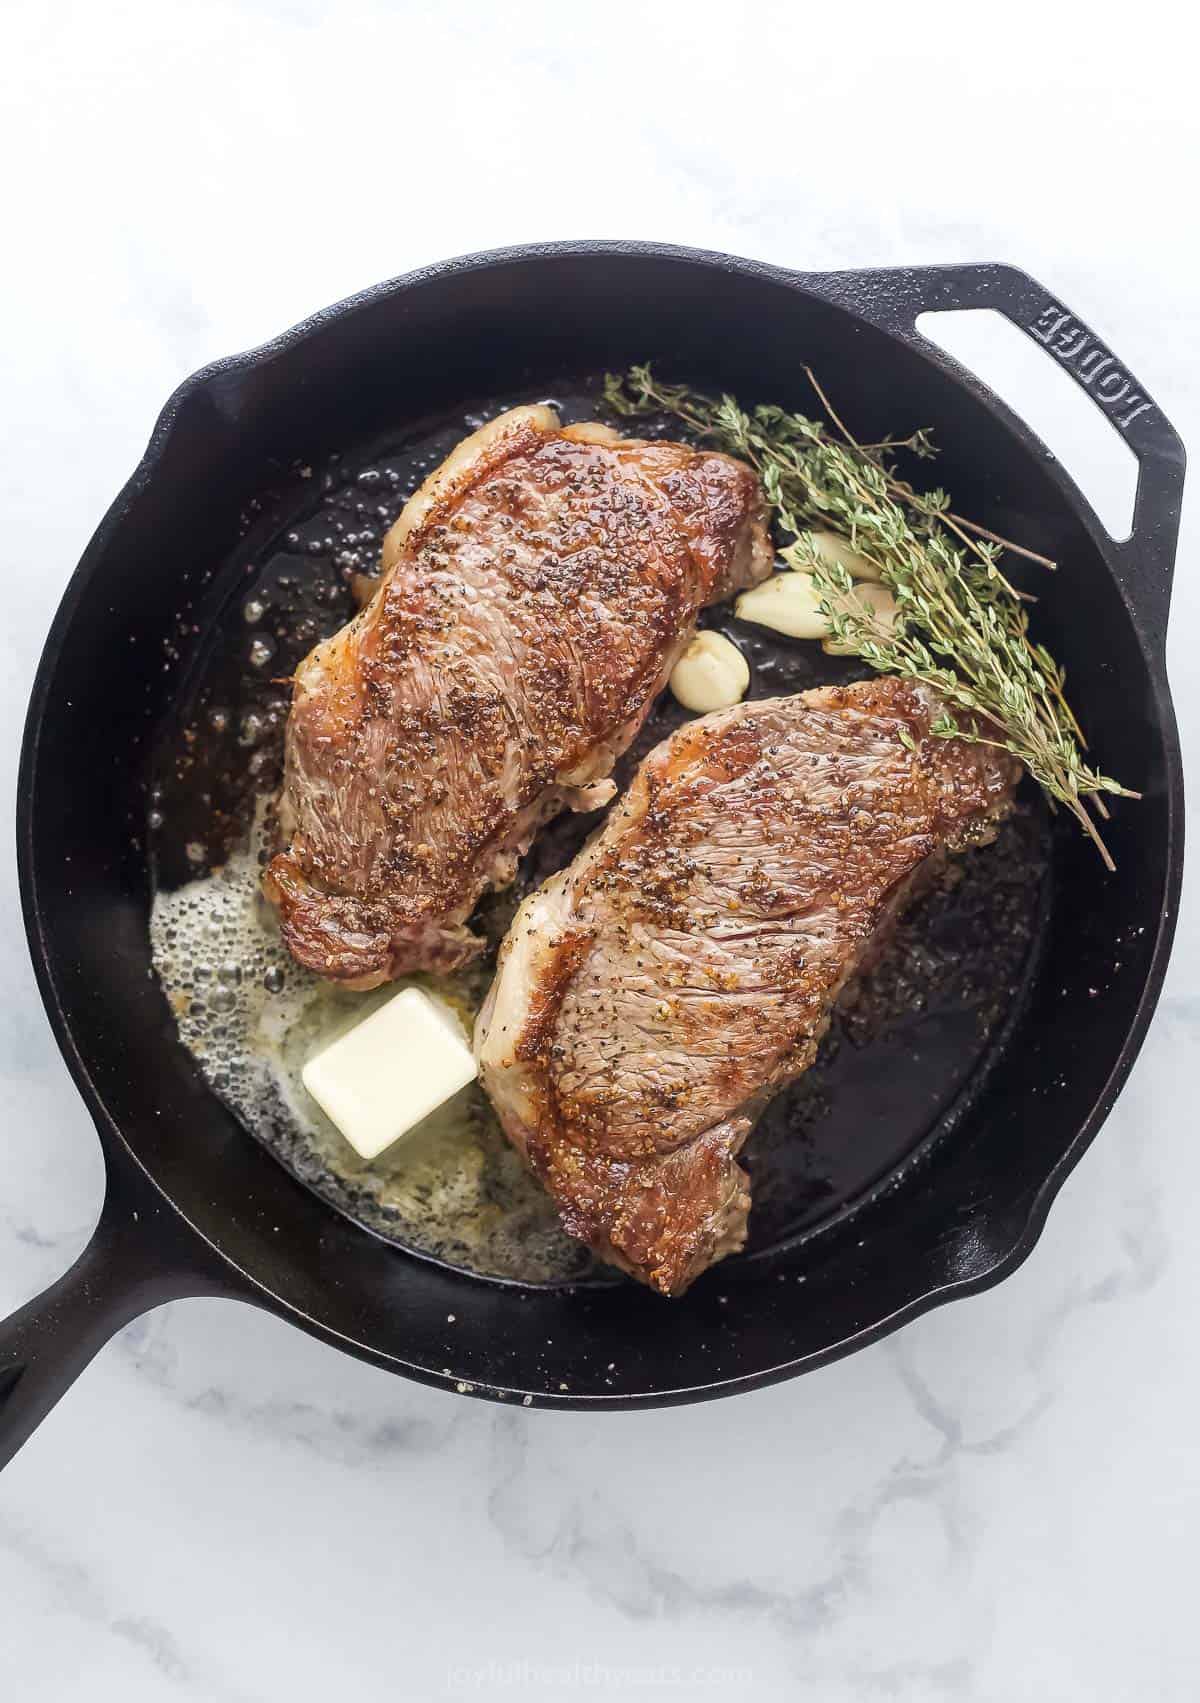 New Year ، steak in a large cast-iron s،et with ،er, thyme, and garlic.